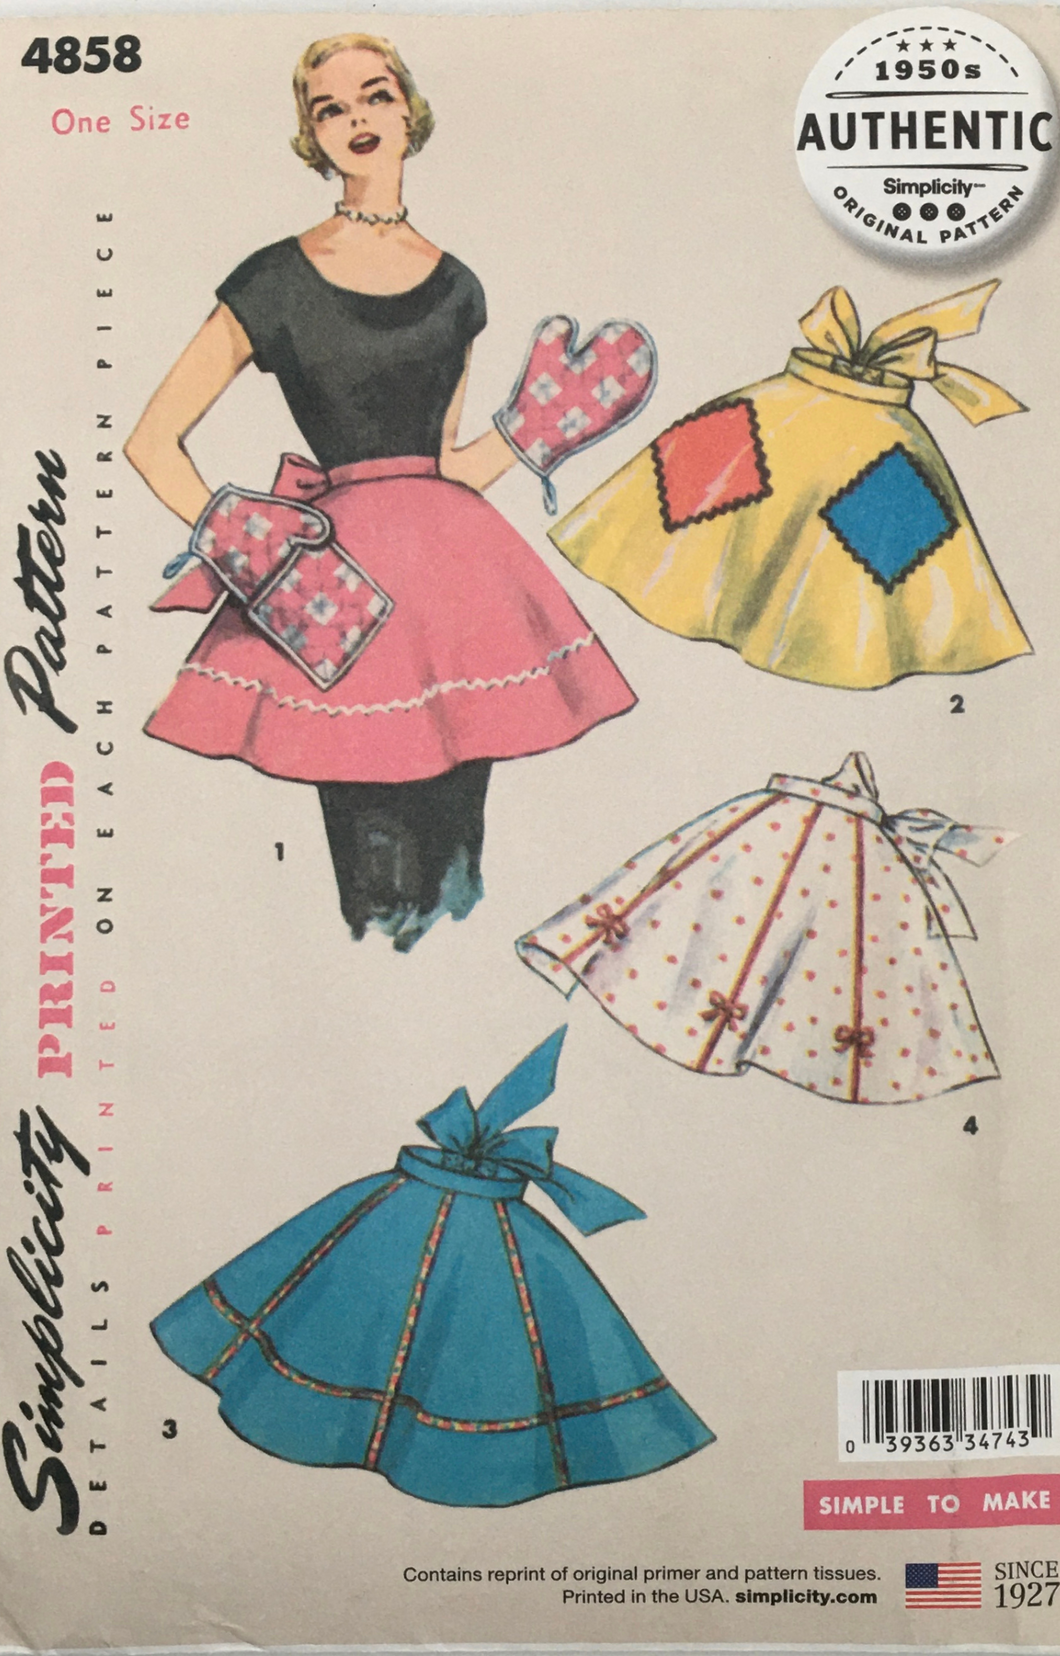 1950's Reproduction Sewing Pattern: Simplicity 4858